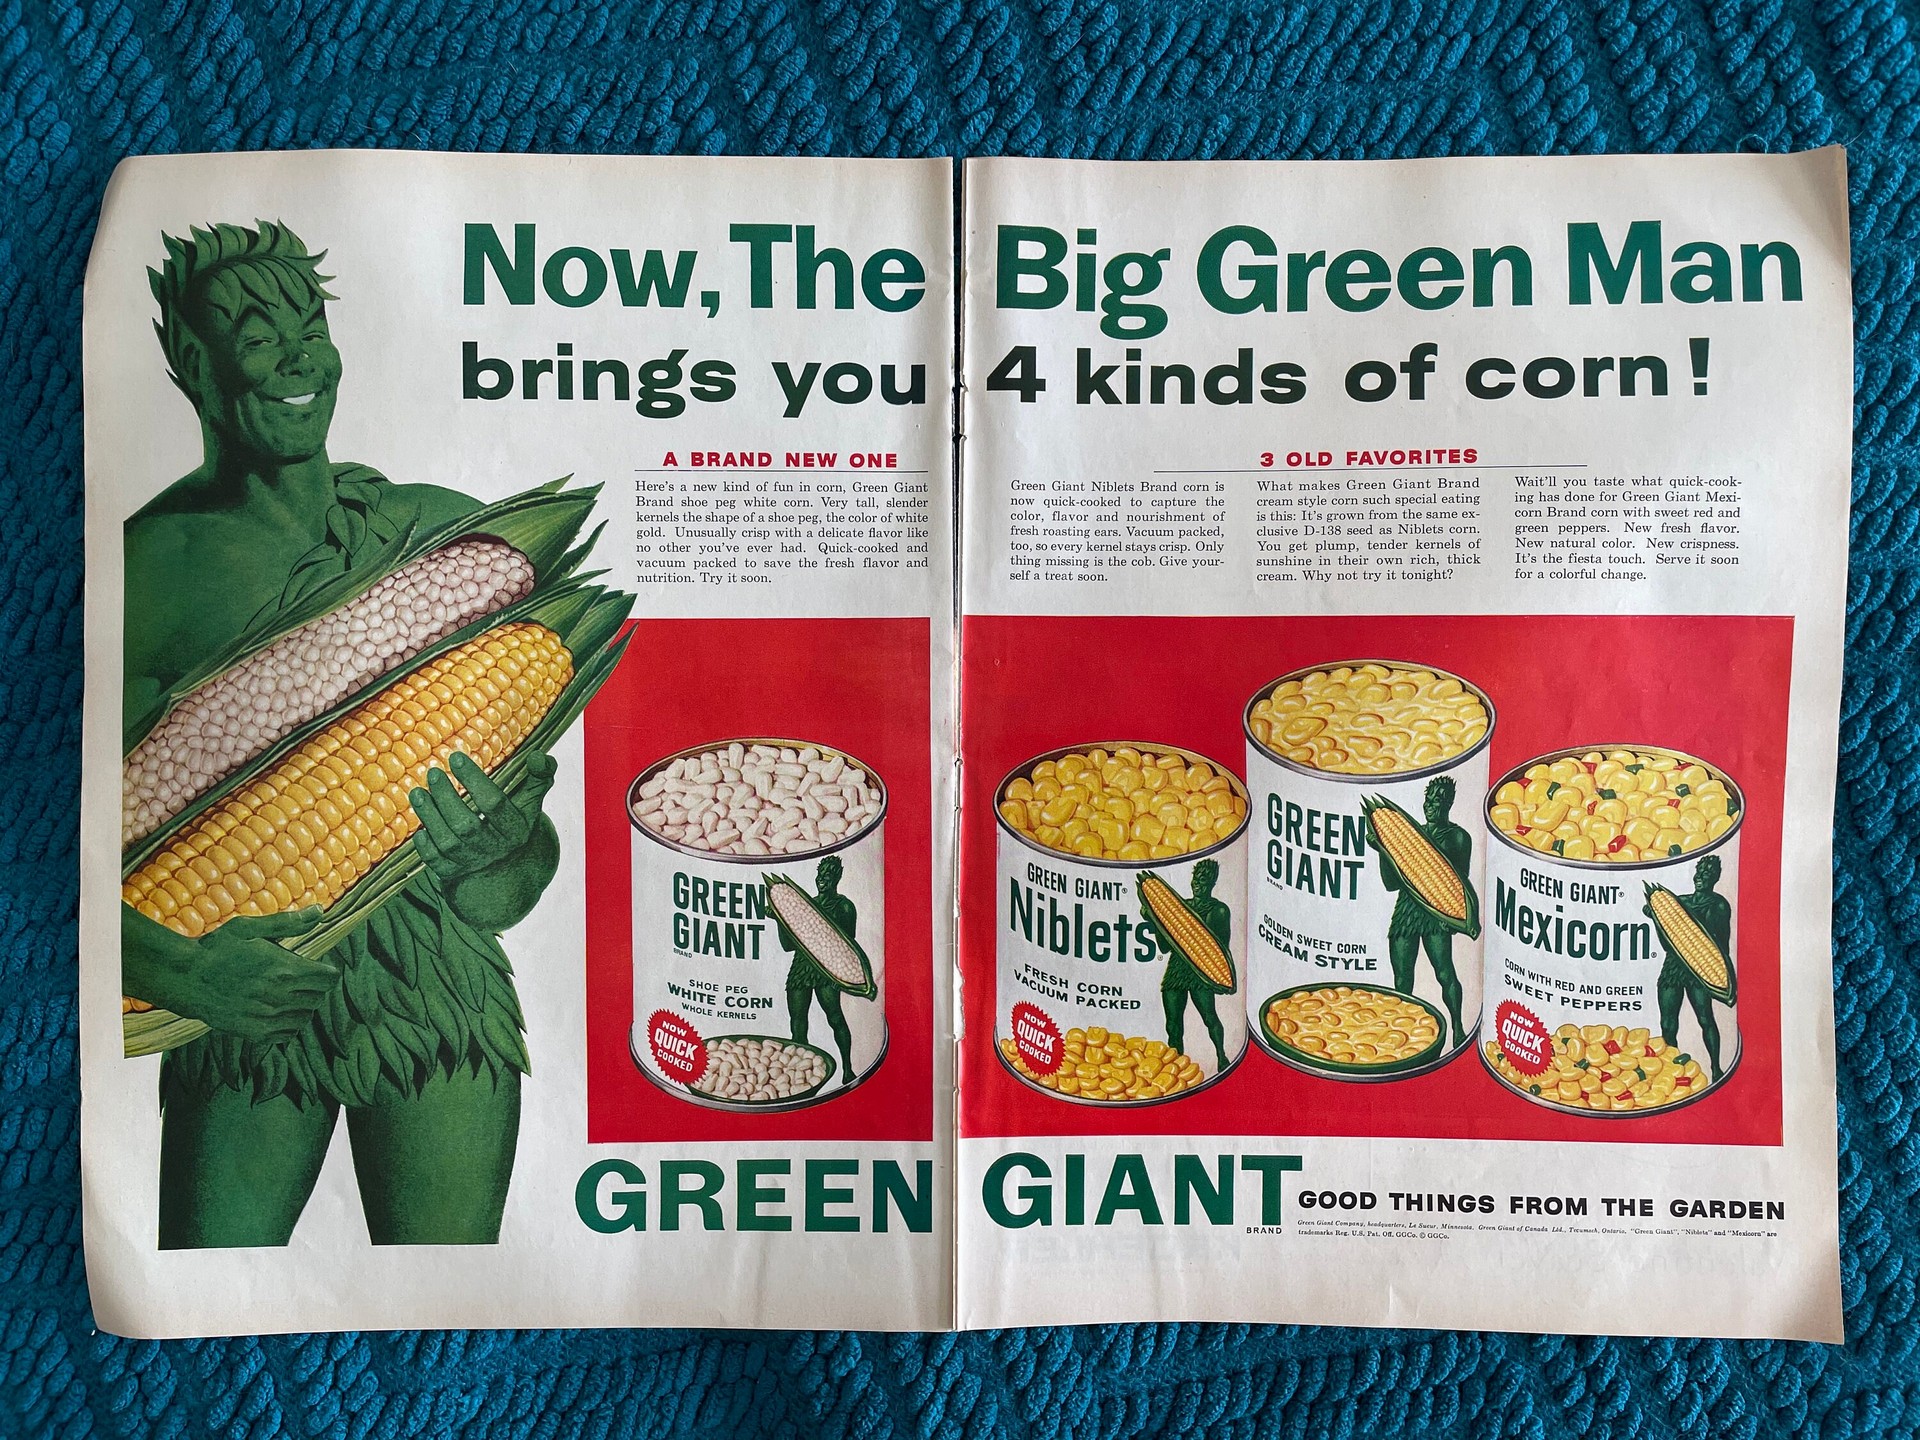  A captivating vintage advertisement likely illustrated by John C Howard, featuring a scenic green giant country.